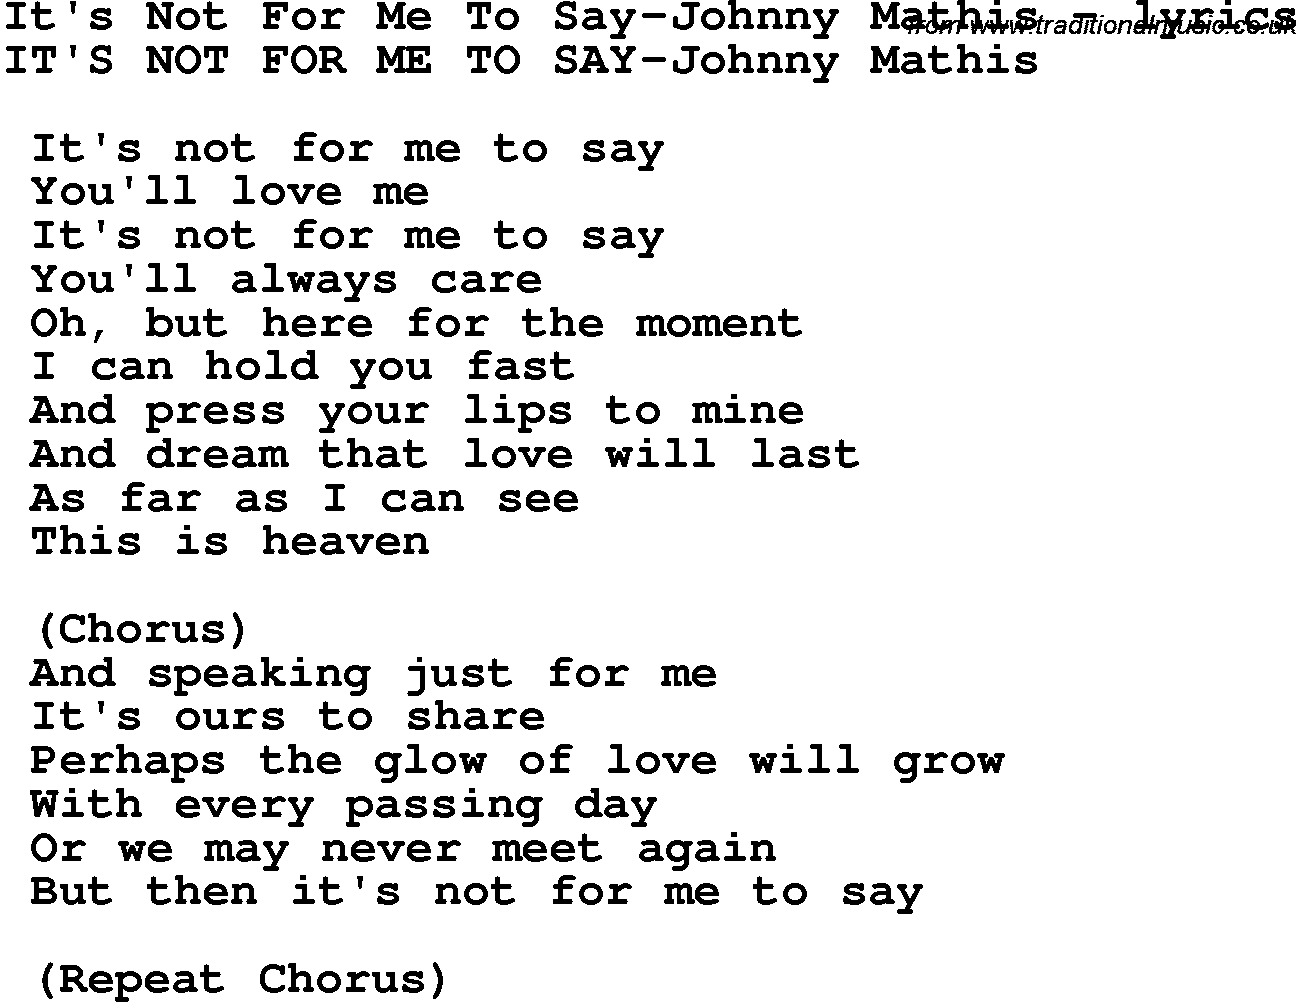 Love Song Lyrics for: It's Not For Me To Say-Johnny Mathis